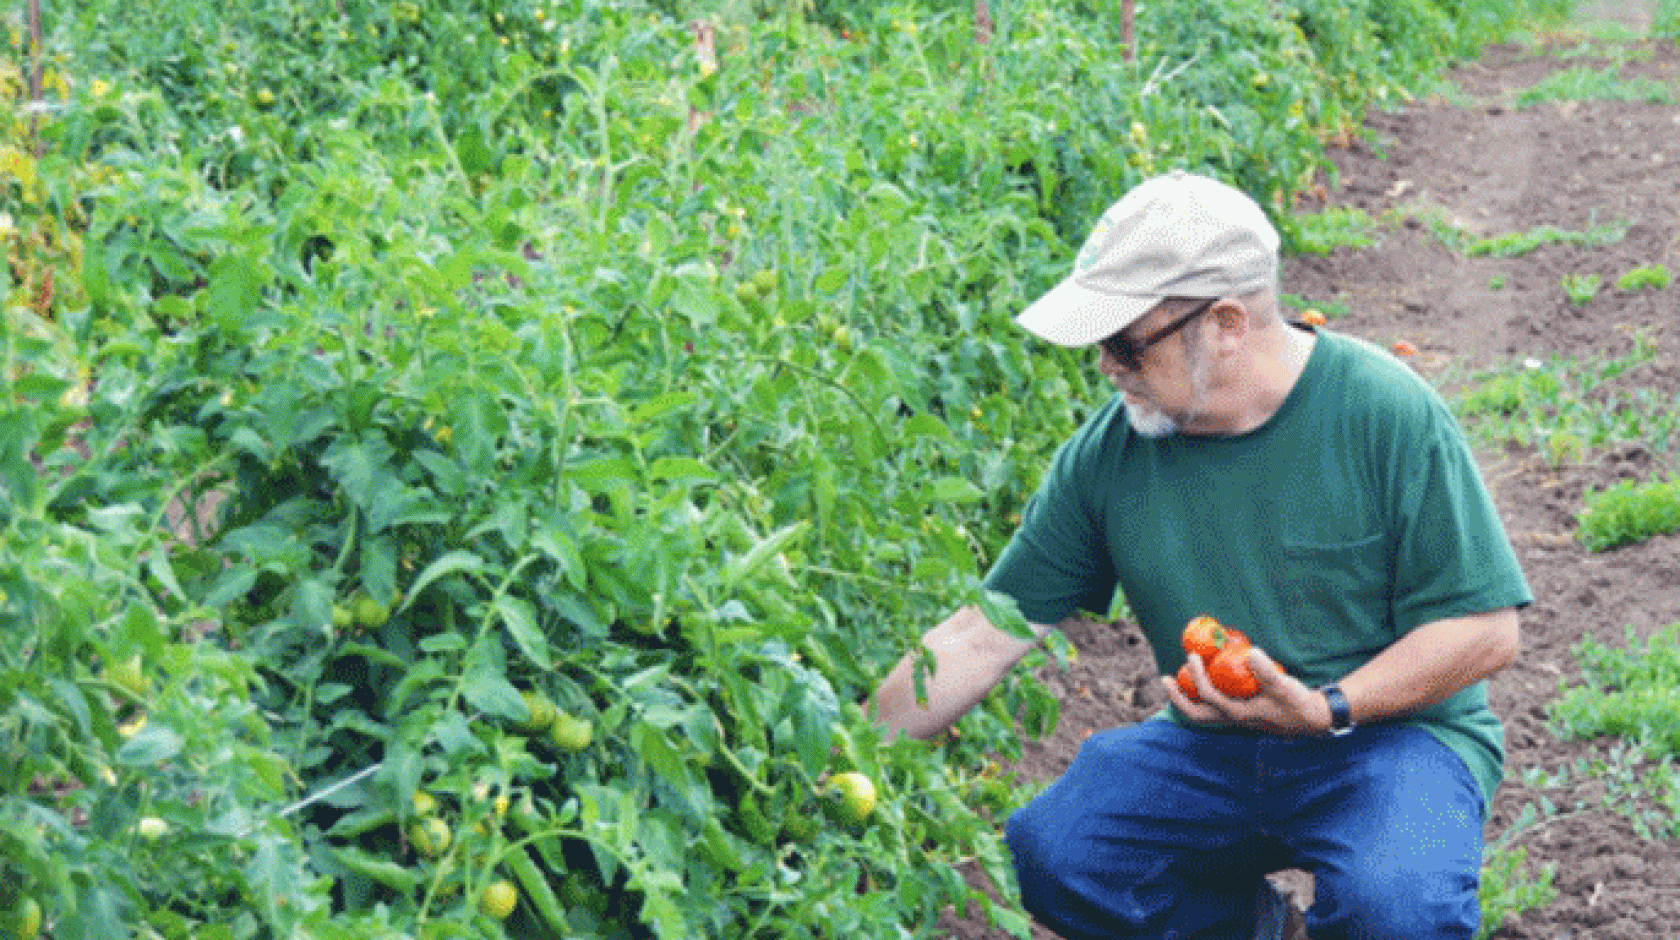 UC Santa Cruz alumnus Mark Lipson, who chaired the Organic Working Group at the U.S. Department of Agriculture from 2010 to 2014, with some of the dry-framed tomatoes grown at Molino Creek Farm.